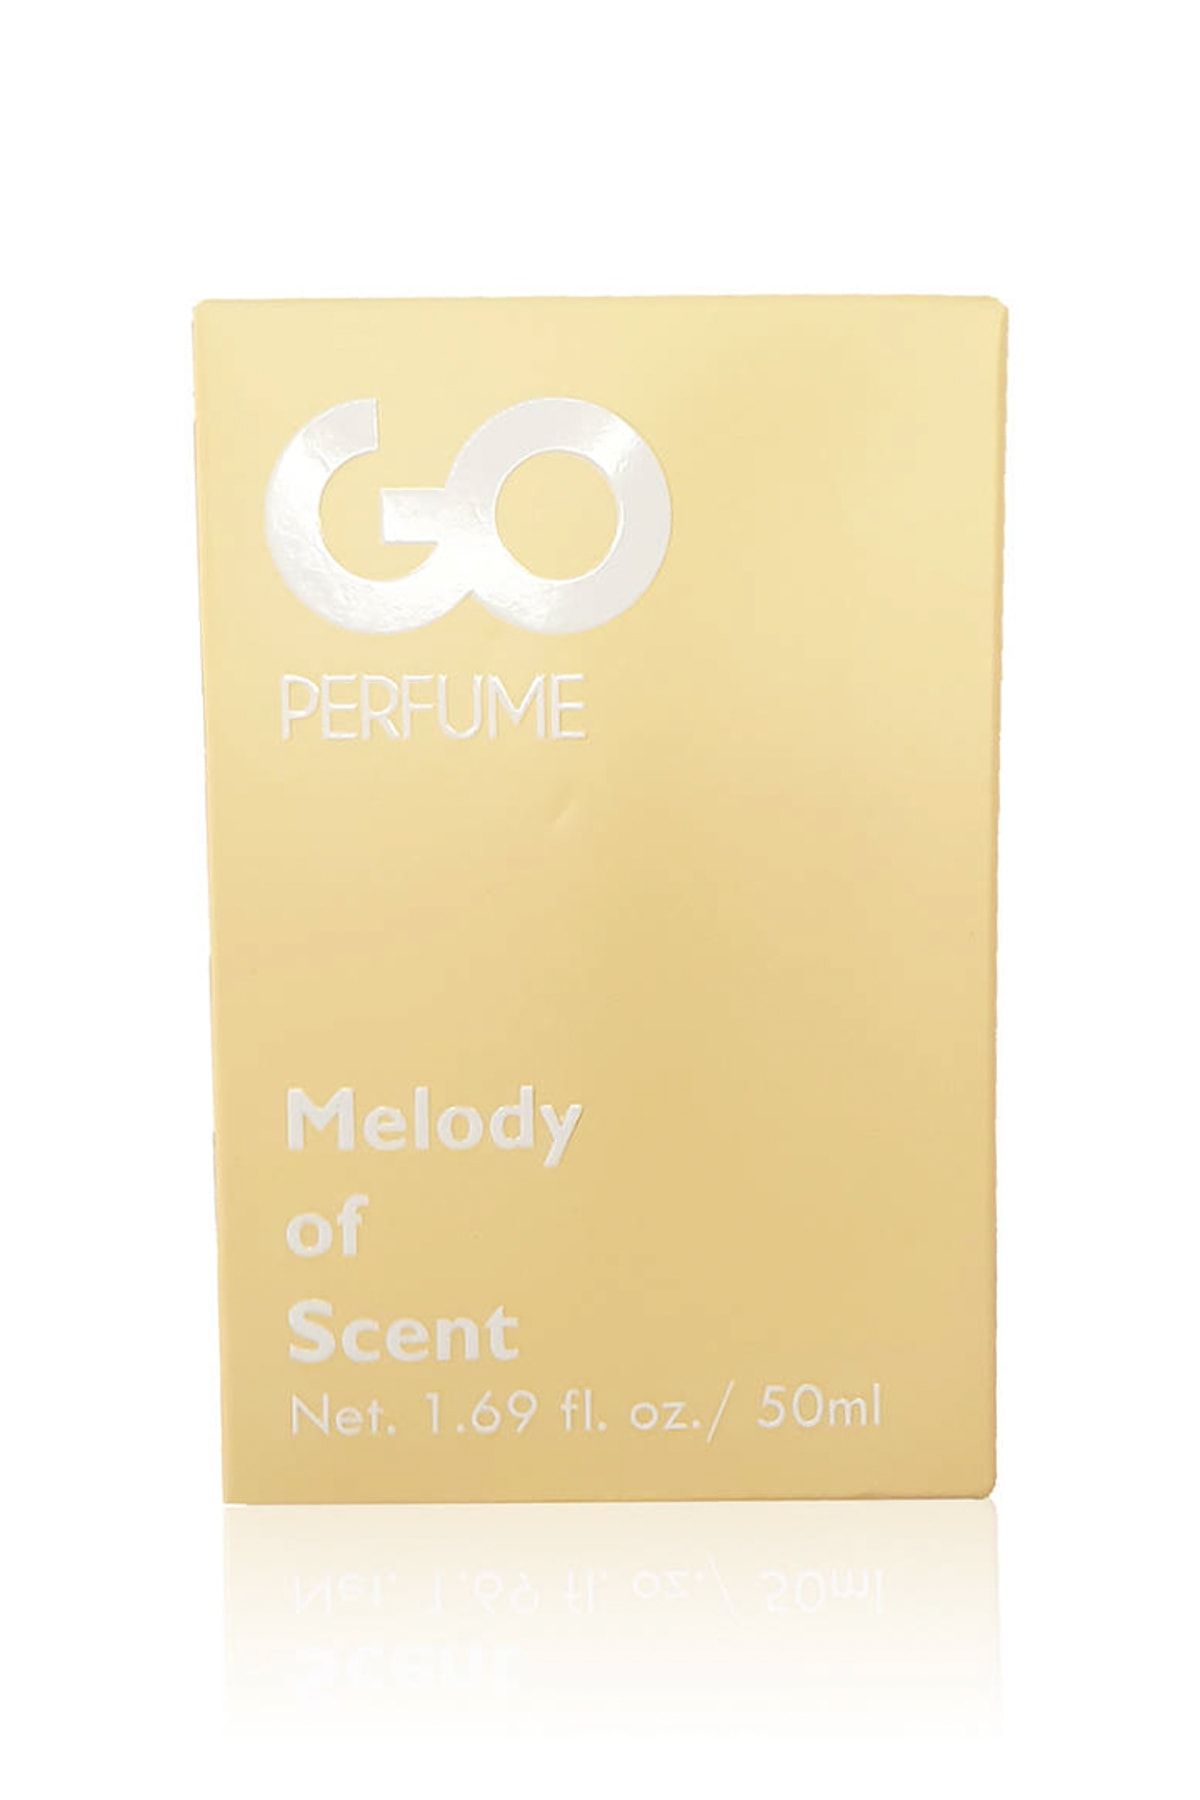 Miniso Go Parfüm (MELODY OF SCENT)